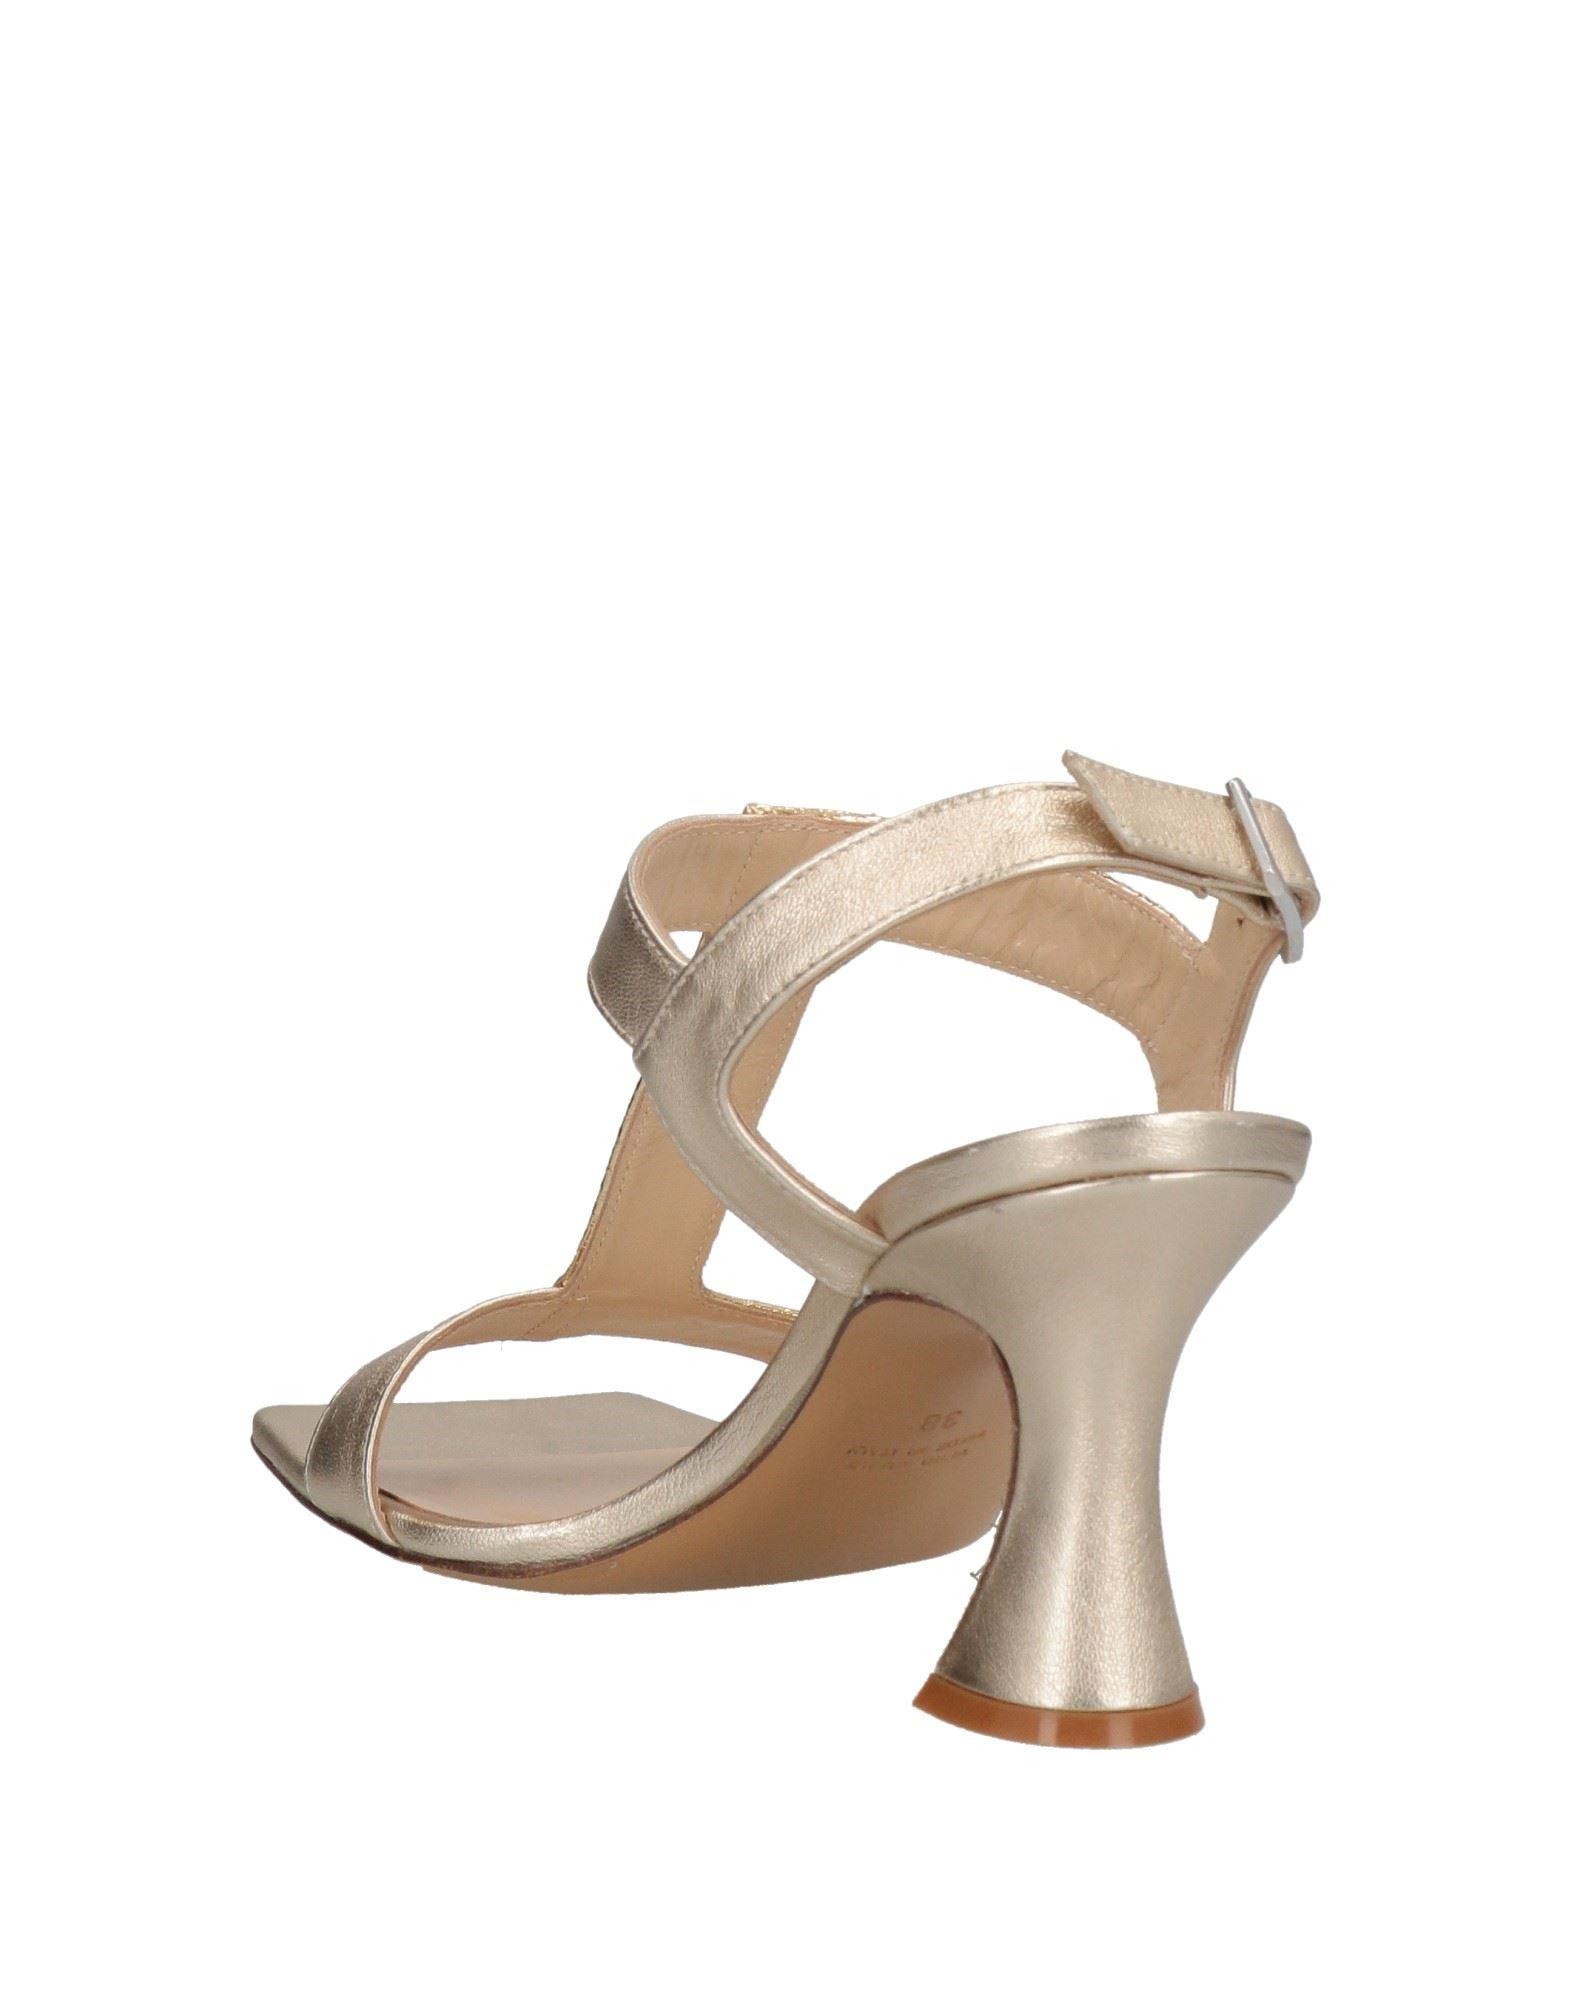 LE FABIAN Sandals in Natural | Lyst